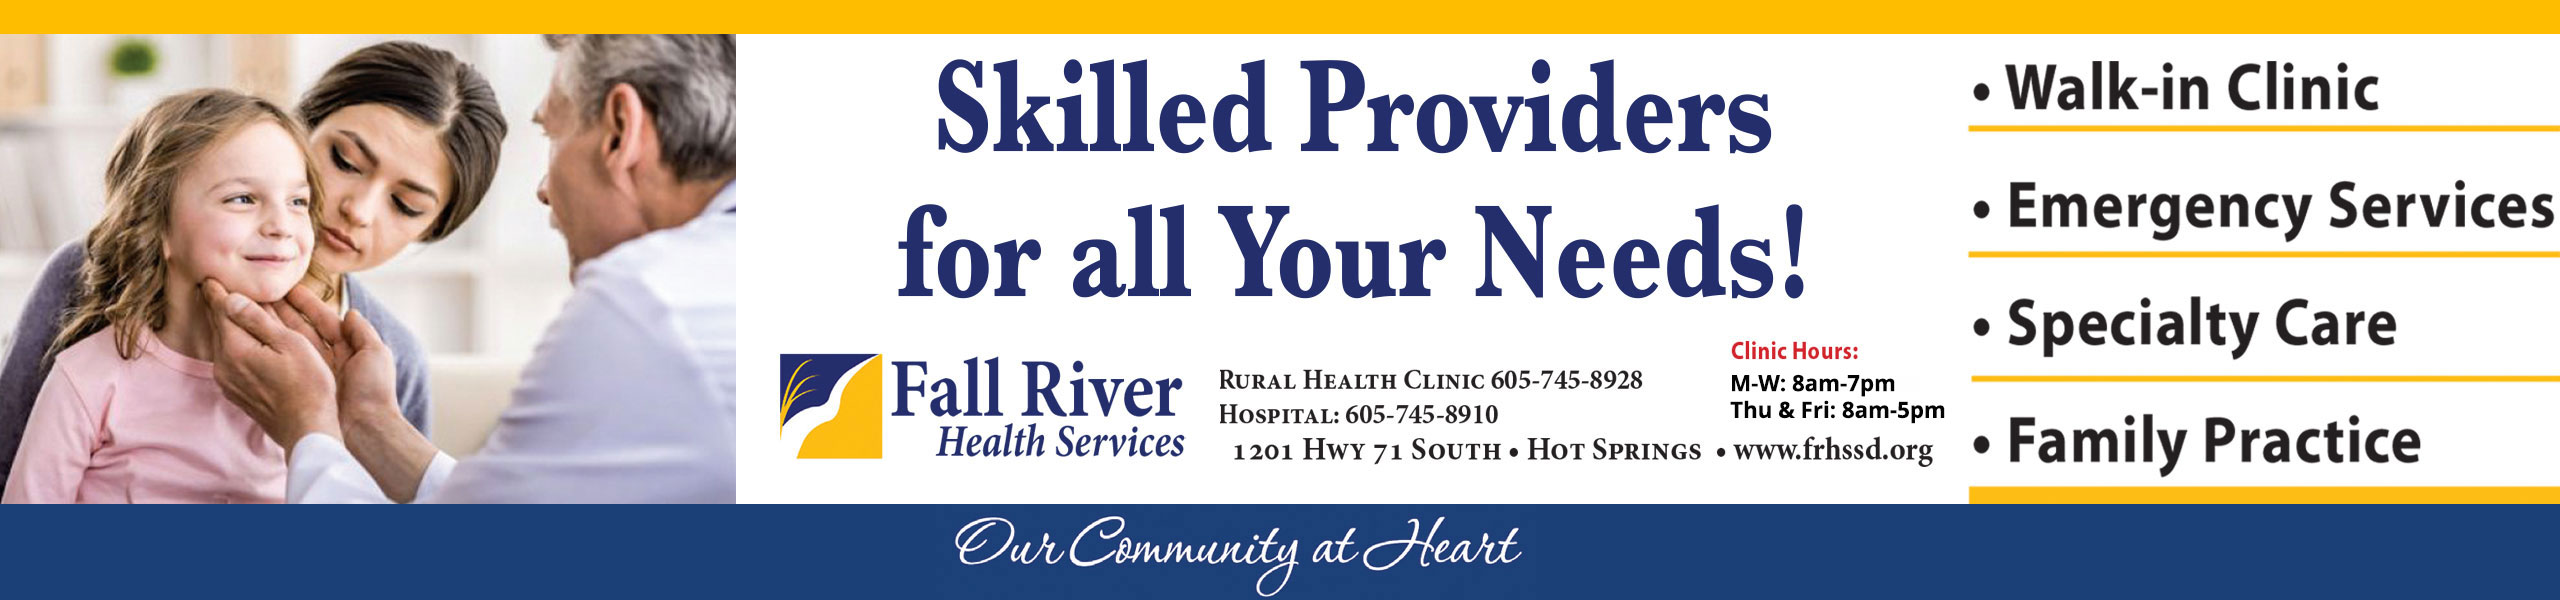 Banner picture of a Physician (male) checking out a little girls neck who is sitting in her moms lap in a Doctors Office.

Banner says:
Skilled Providers for all your Needs!

Fall River Health Services 
Rural Health Clinic 605-745-8929
Hospital: 605-745-8910
1201 Hwy 71 South - Hot Springs

Clinic Hours:
M-W: 8am-7pm
Thu & Fri: 8am-5pm

* Walk-In Clinic
* Emergency Services
*Specialty Care
*Family Practice